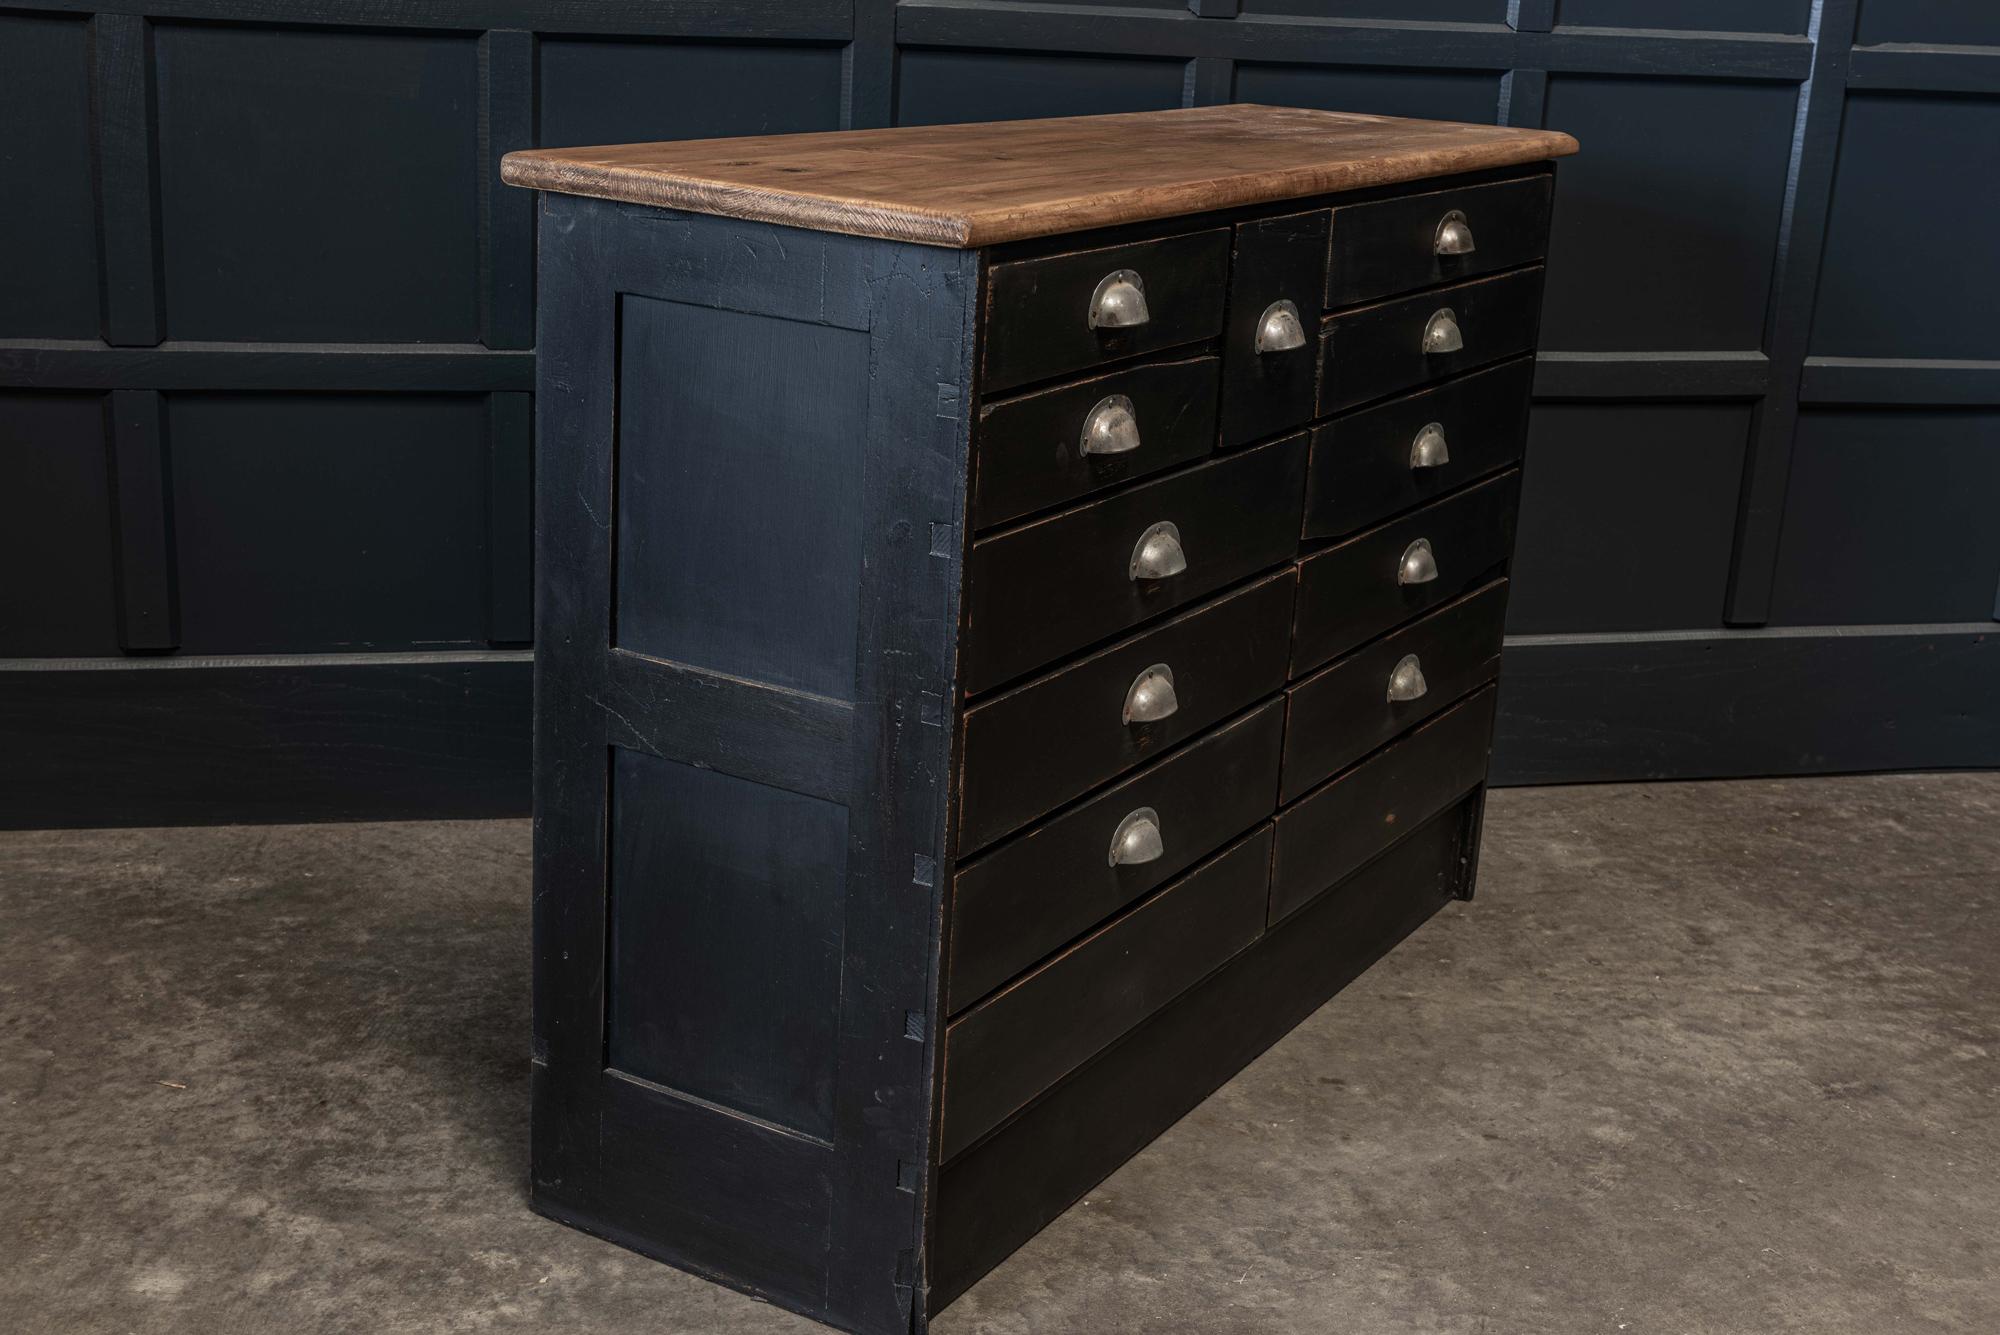 English ebonized haberdashery bank of 13 drawers,
circa 1930.

Bank of 13 drawers with paneled sides. Slim with a narrow depth makes it a versatile piece of furniture. Ideal in a kitchen, hall or bedroom.

Sku 421

Measures: W 130 x D 40 x H 89cm.